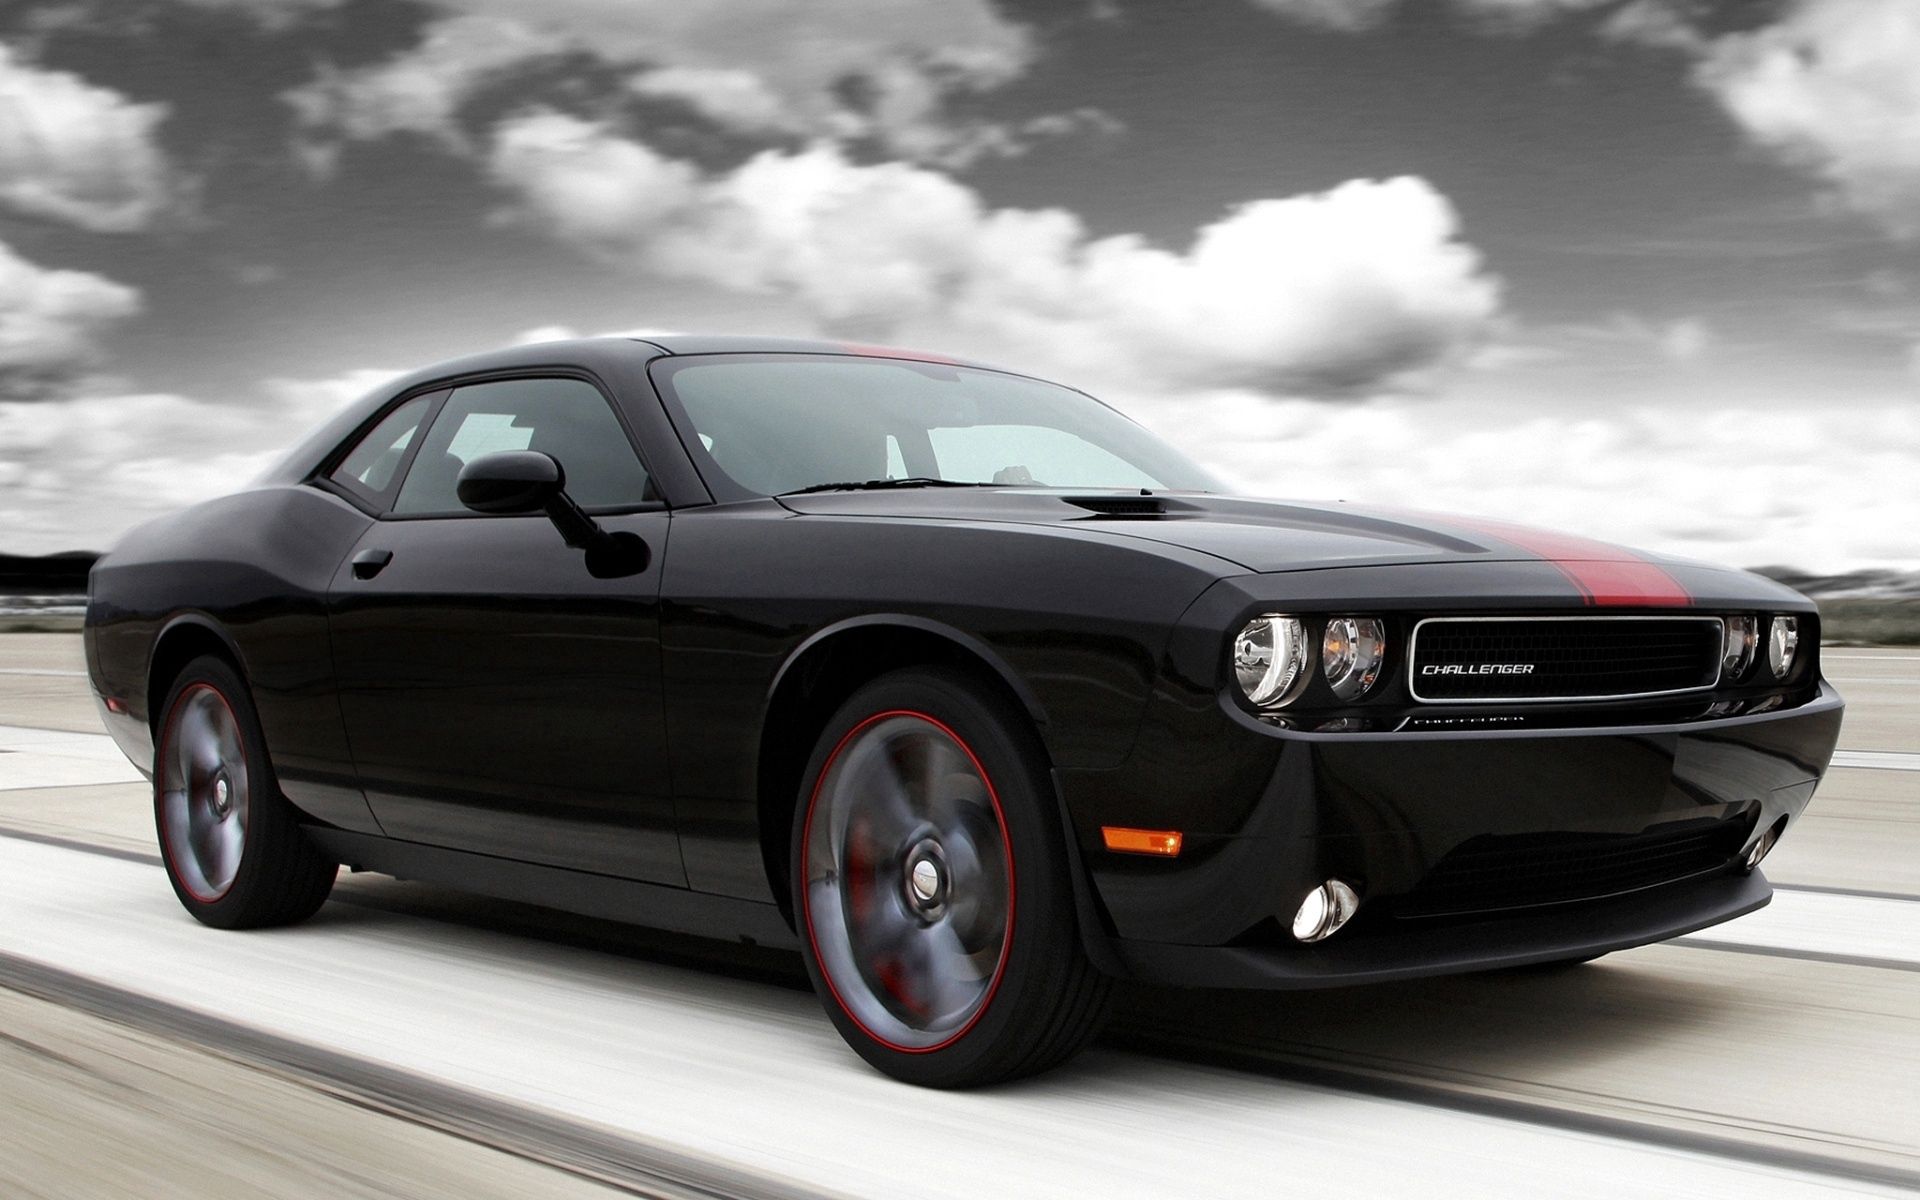 Free Images limber, rallye redline, challenger, cars Muscle Car